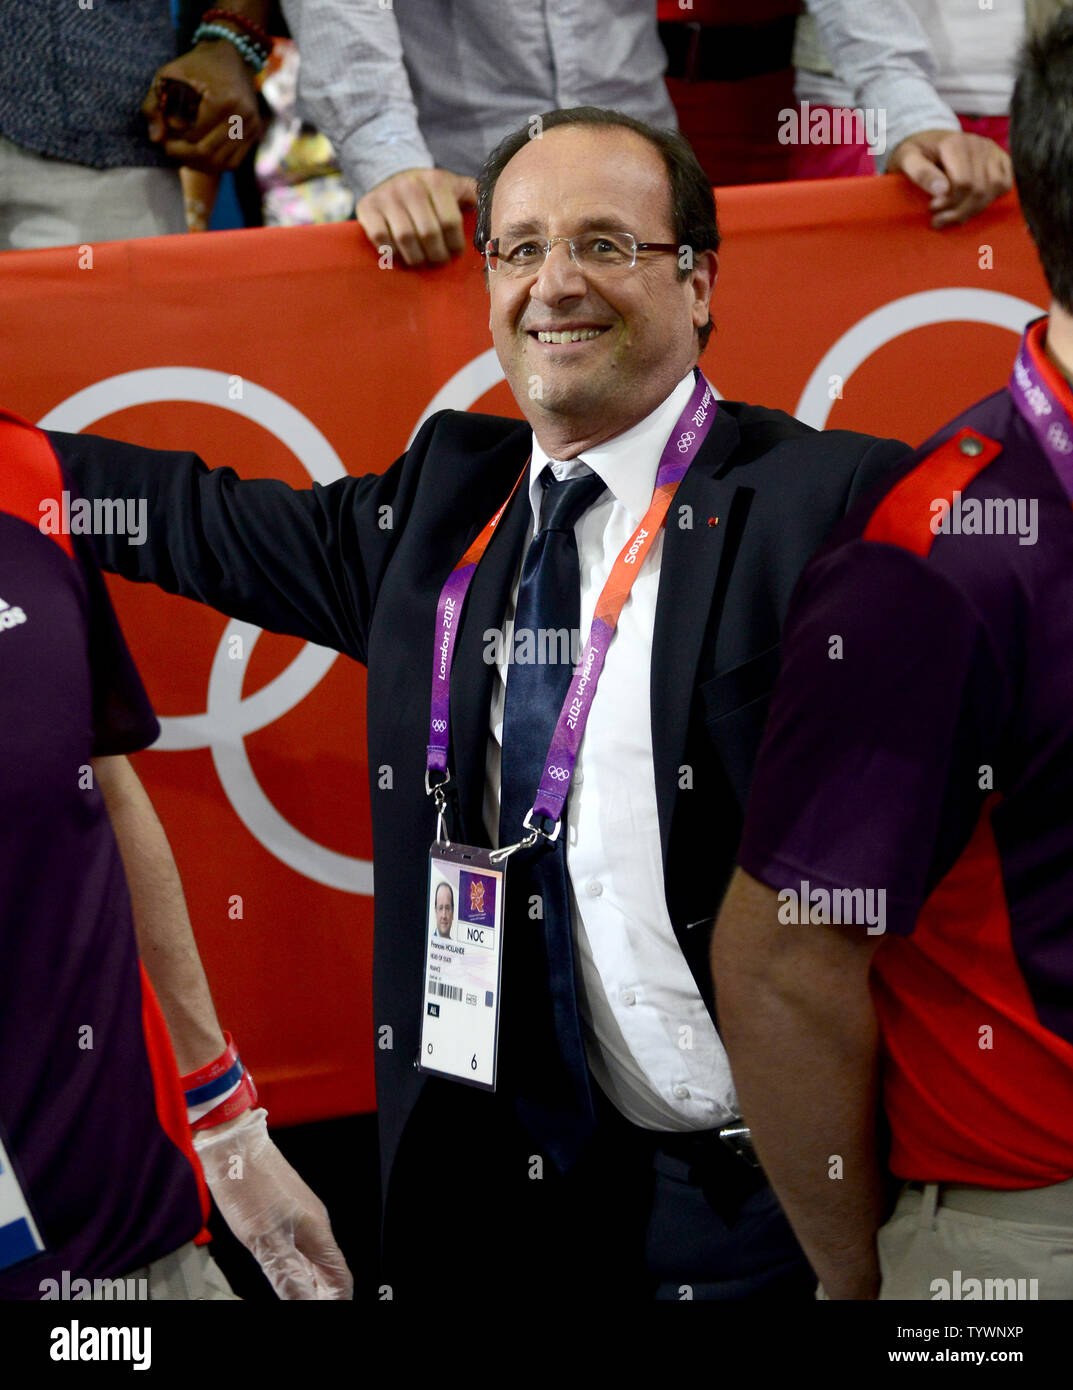 President Francois Hollande of France attends the men's 73kg Judo contest at the London 2012 Summer Olympics on July 30, 2012 in London.  Hollande witnessed Ugo LeGrand's Bronze Medal contest against Ki-Chun Wang of the Republic of Korea (South Korea).  UPI/Ron Sachs Stock Photo